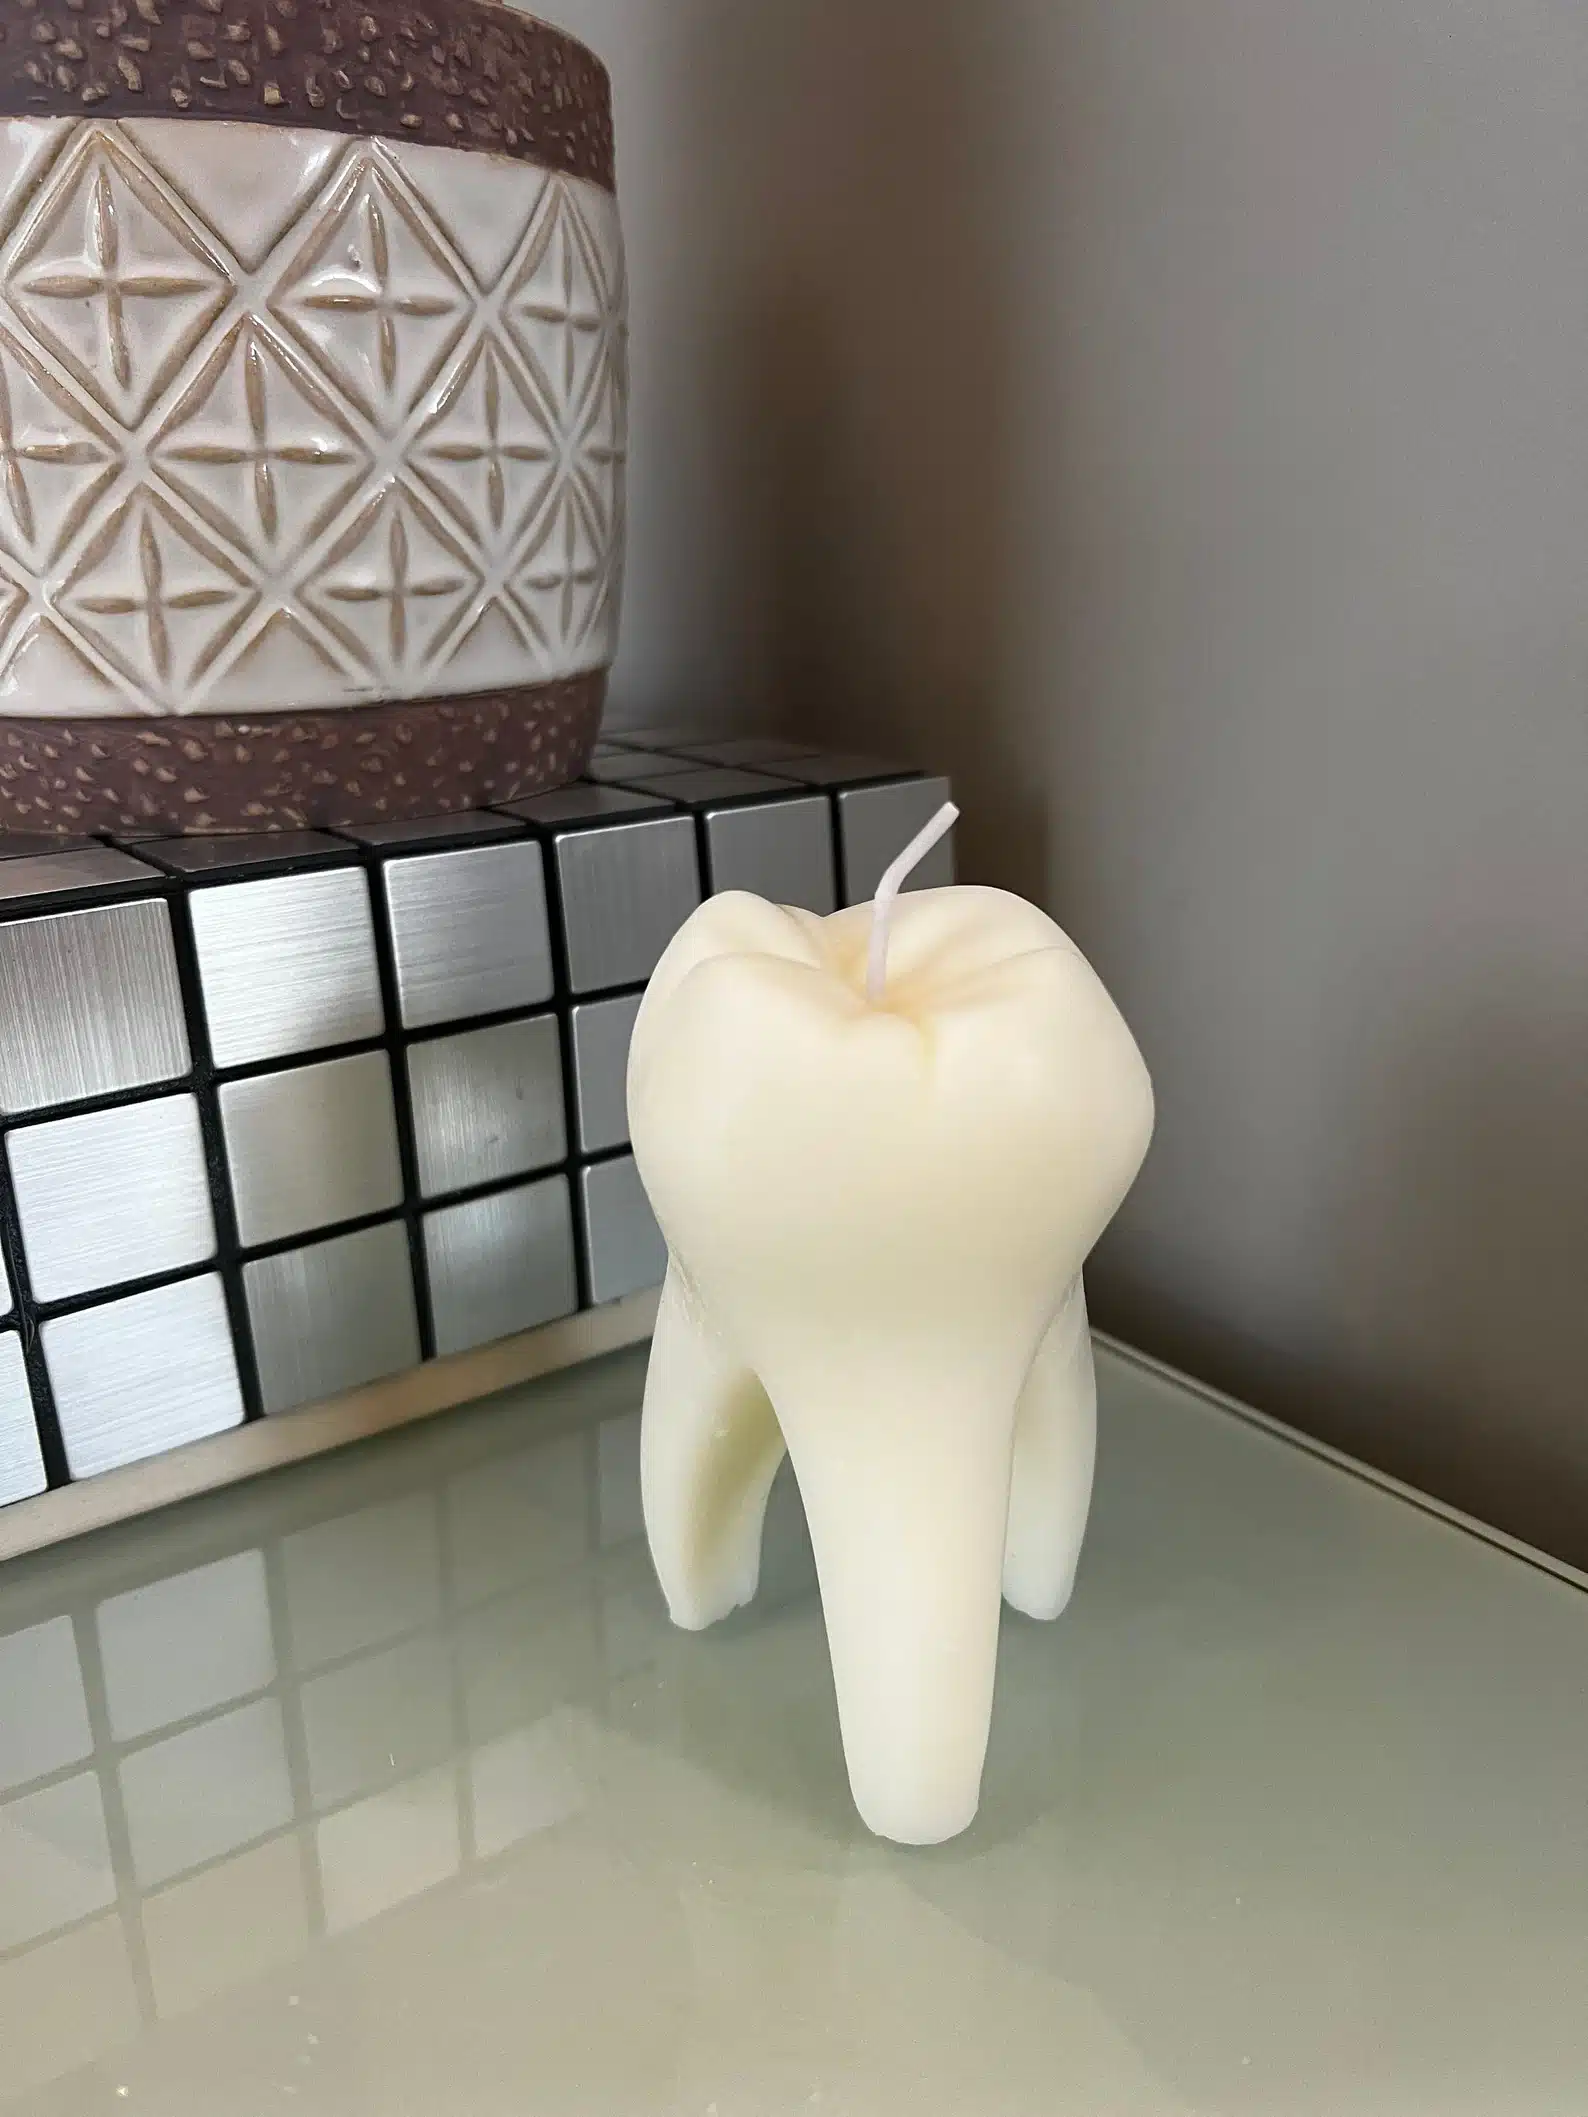 Large Tooth Candle